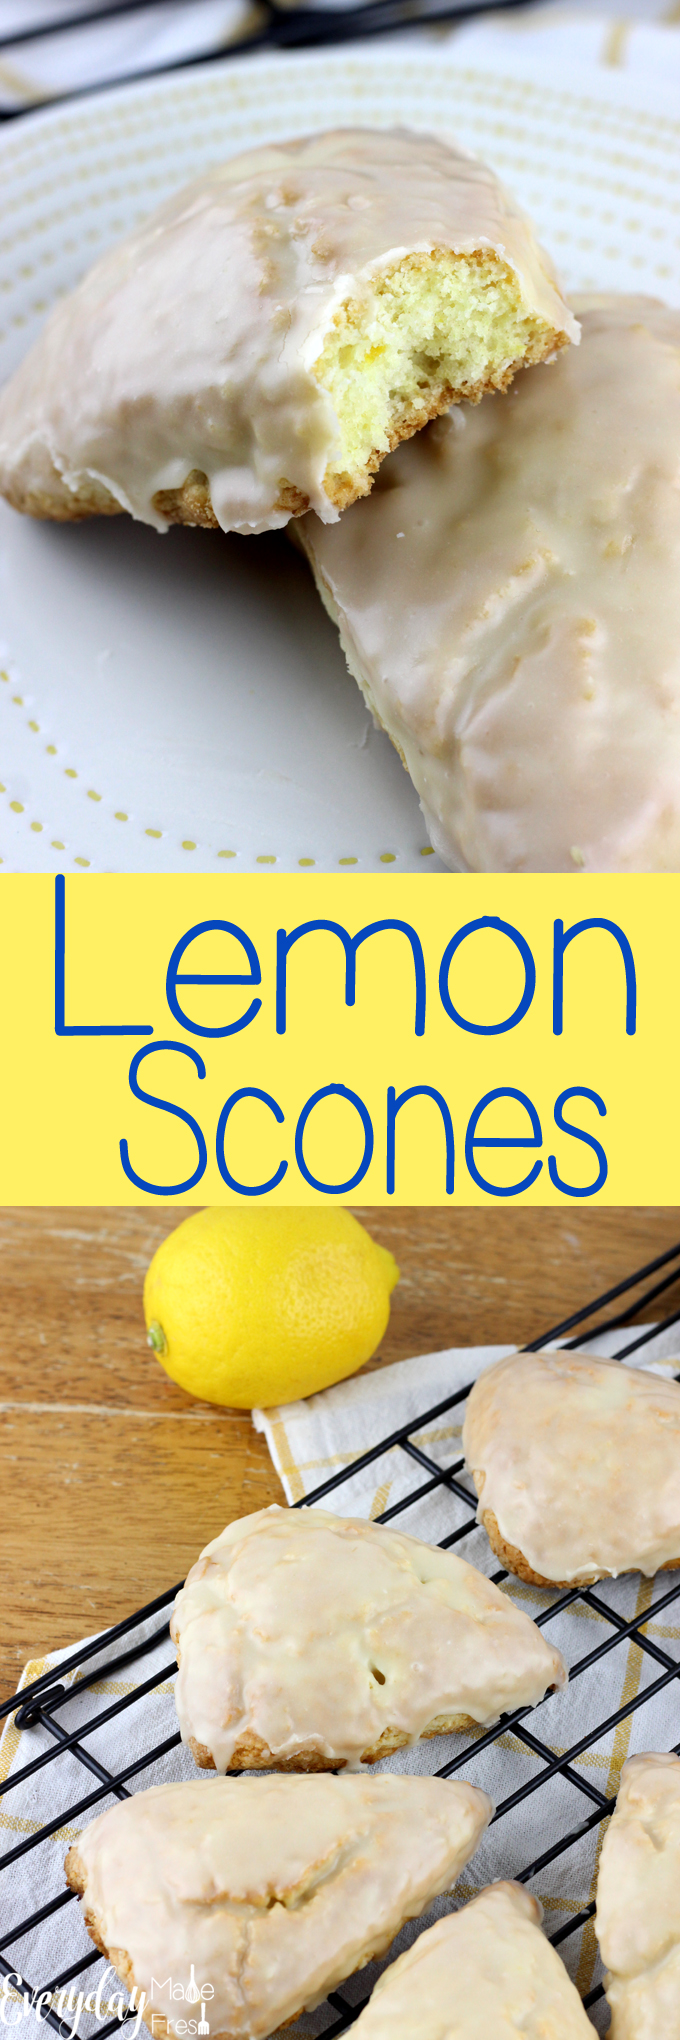 Lemon Scones are light and fluffy, bursting with lemon flavor! They are dipped in a lemon glaze that make these the perfect breakfast or snack. | EverydayMadeFresh.com